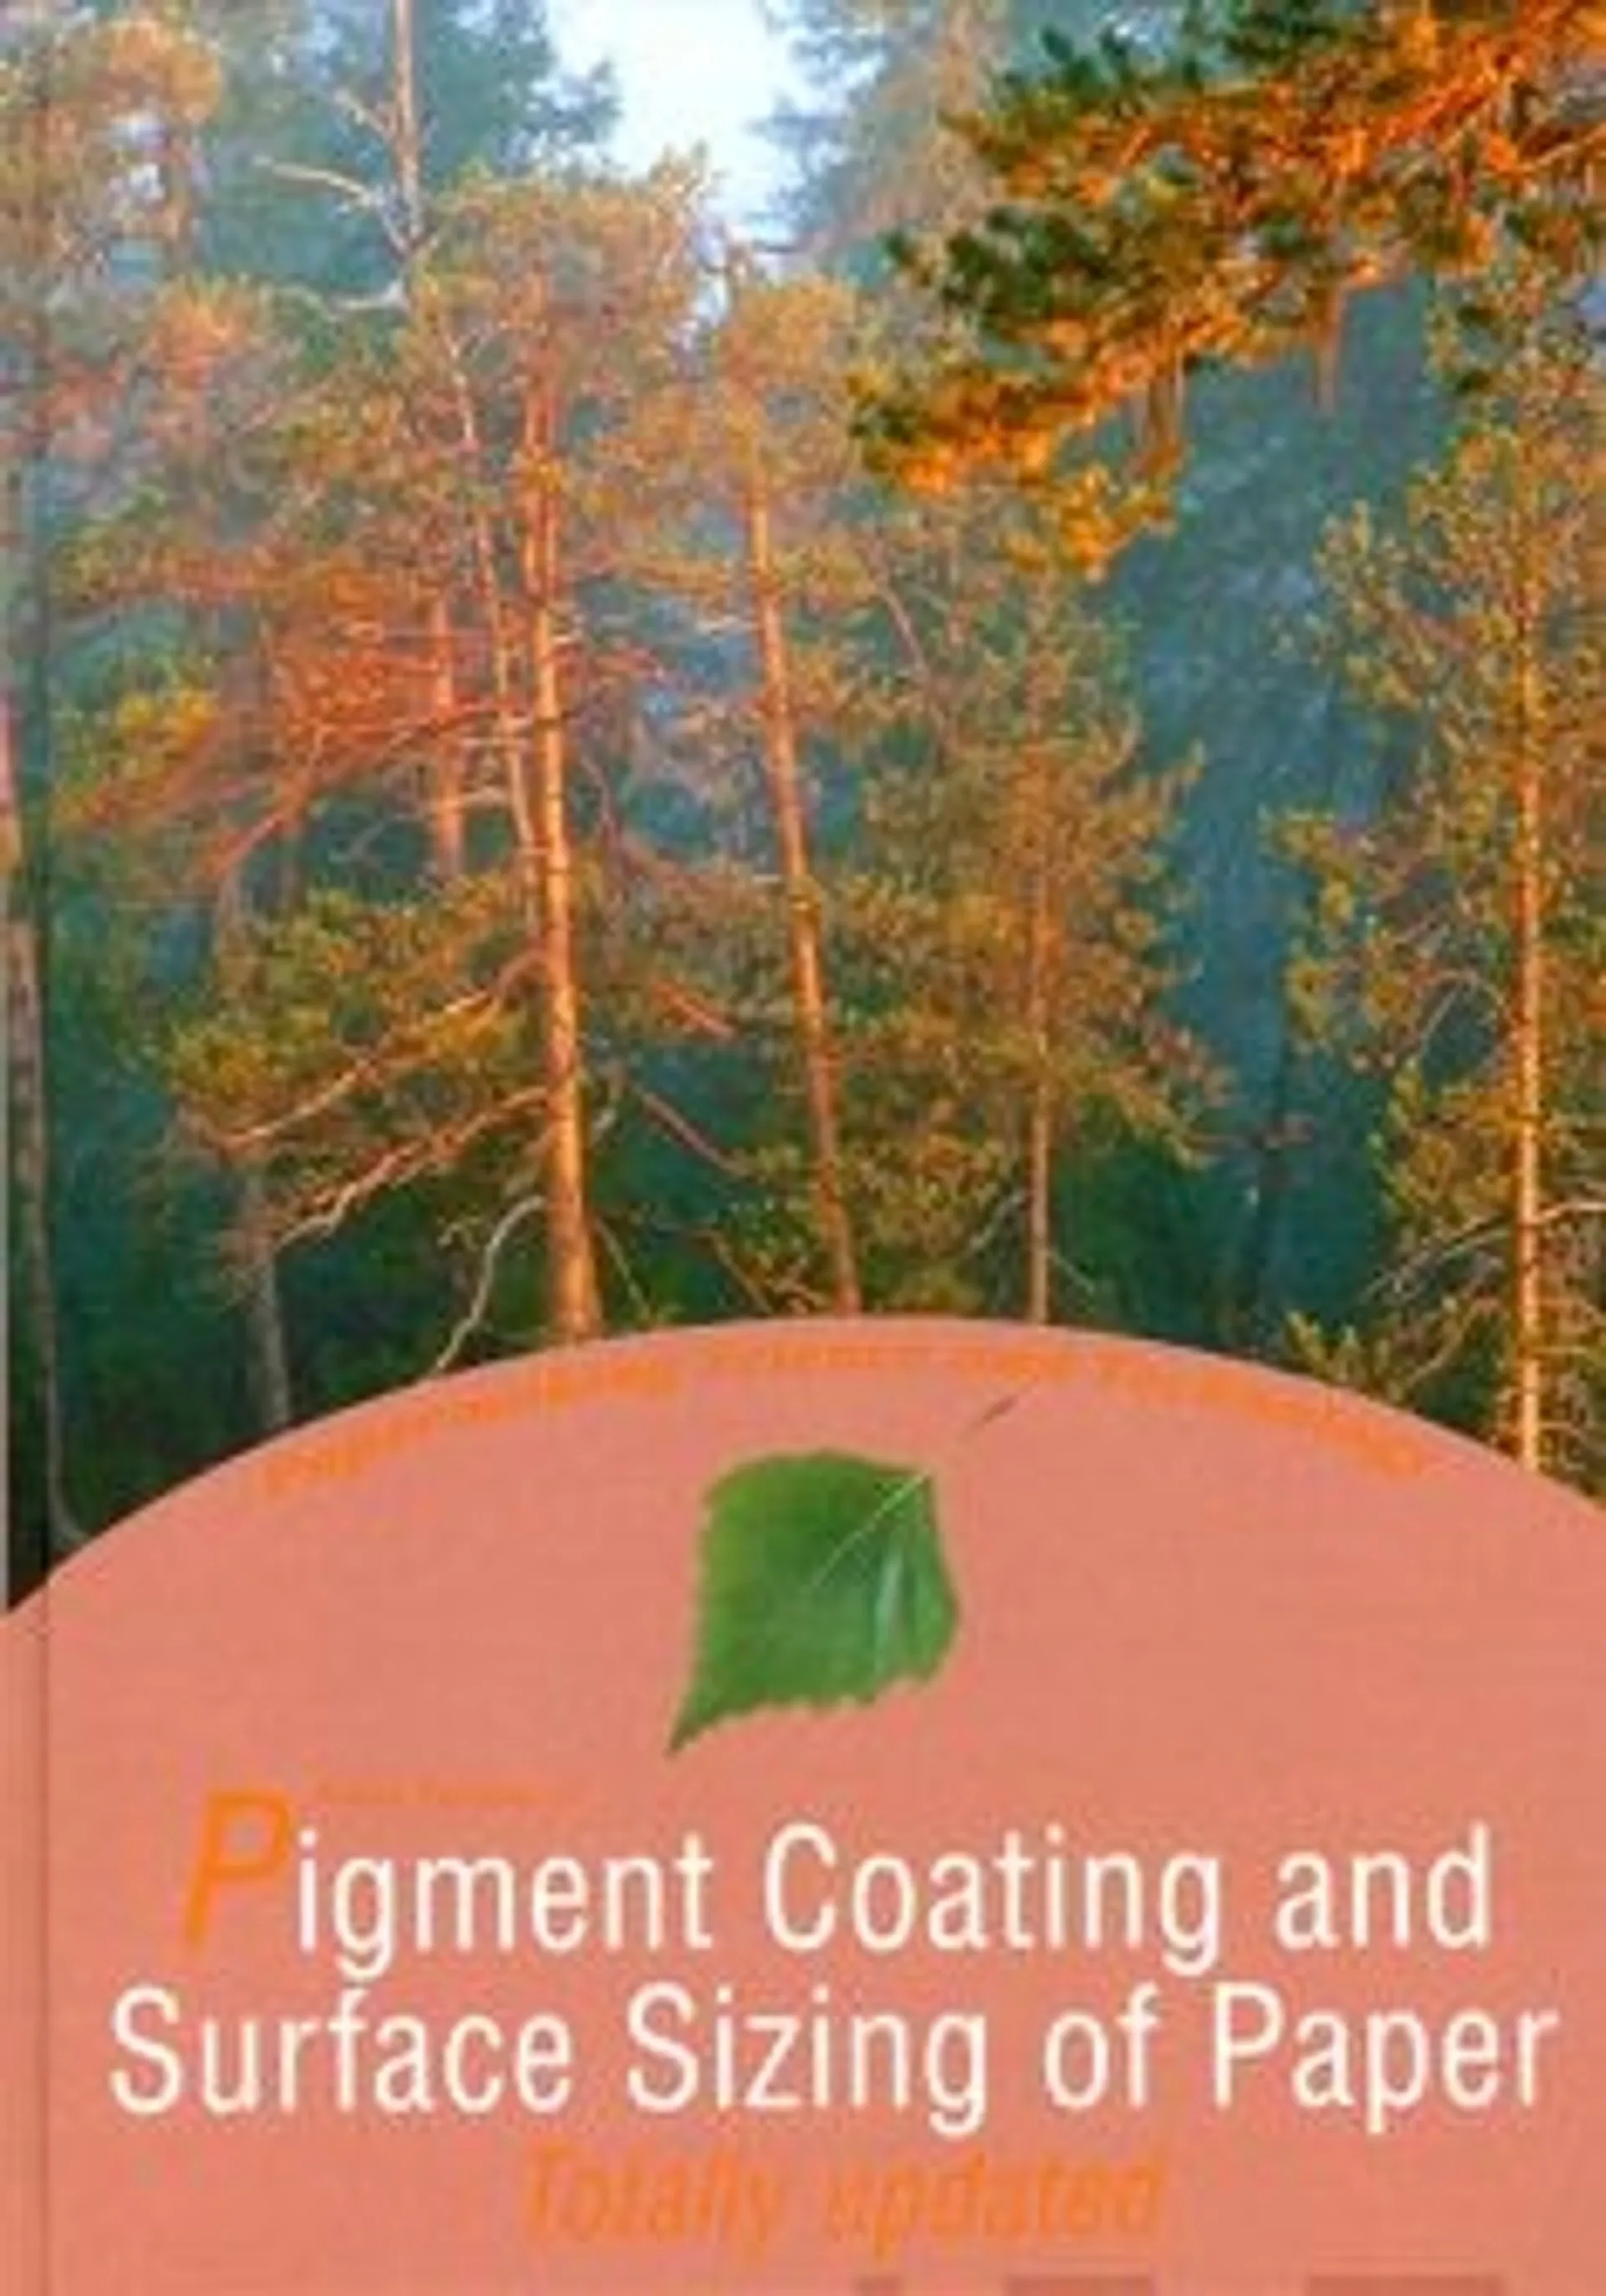 Pigment coating and surface sizing of paper